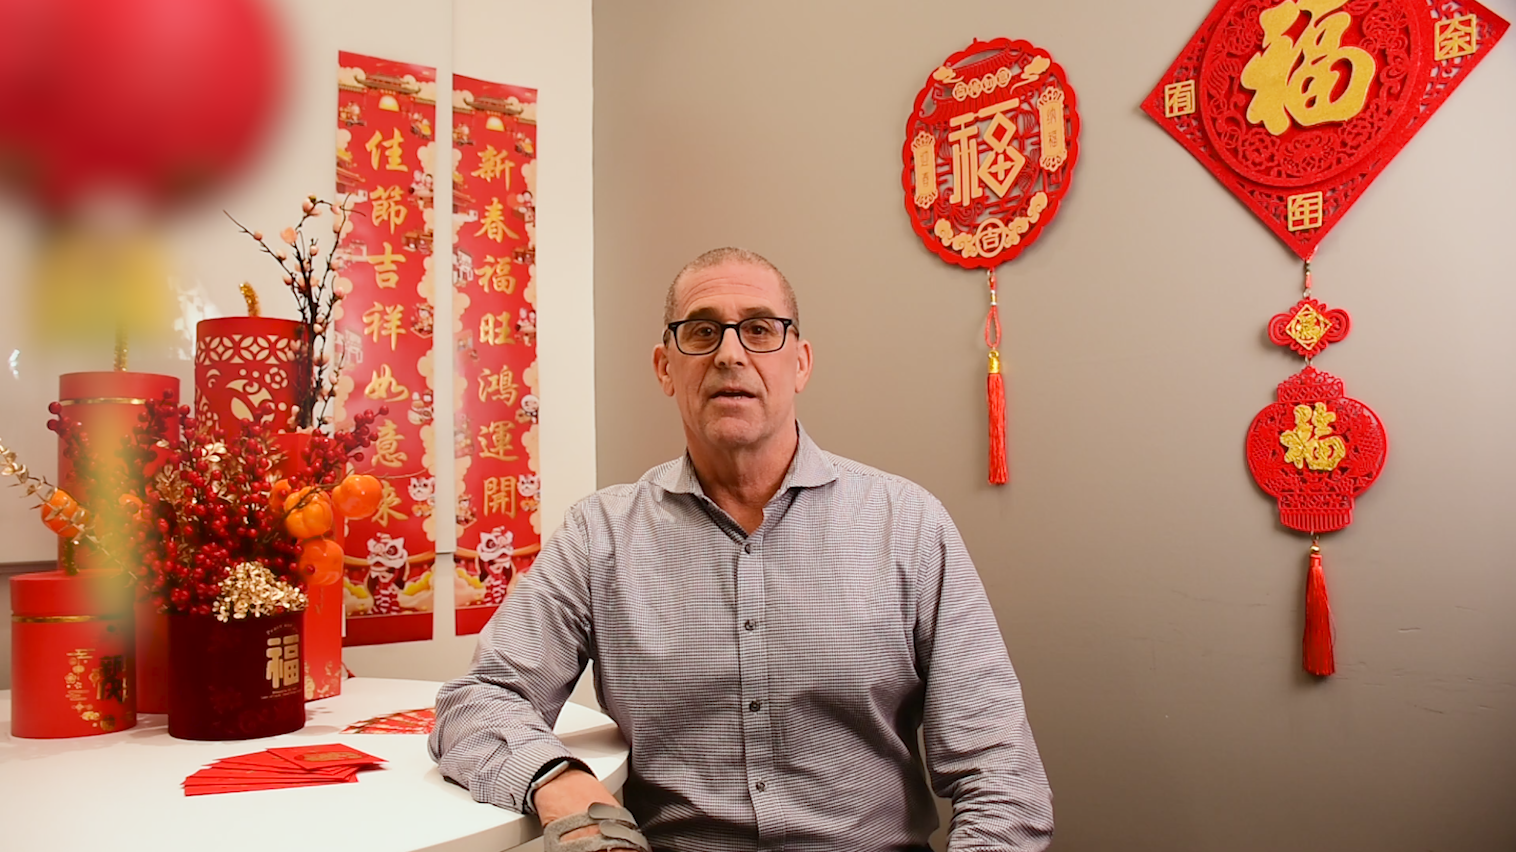 Man speaking with red Chinese New Year decorated backdrop